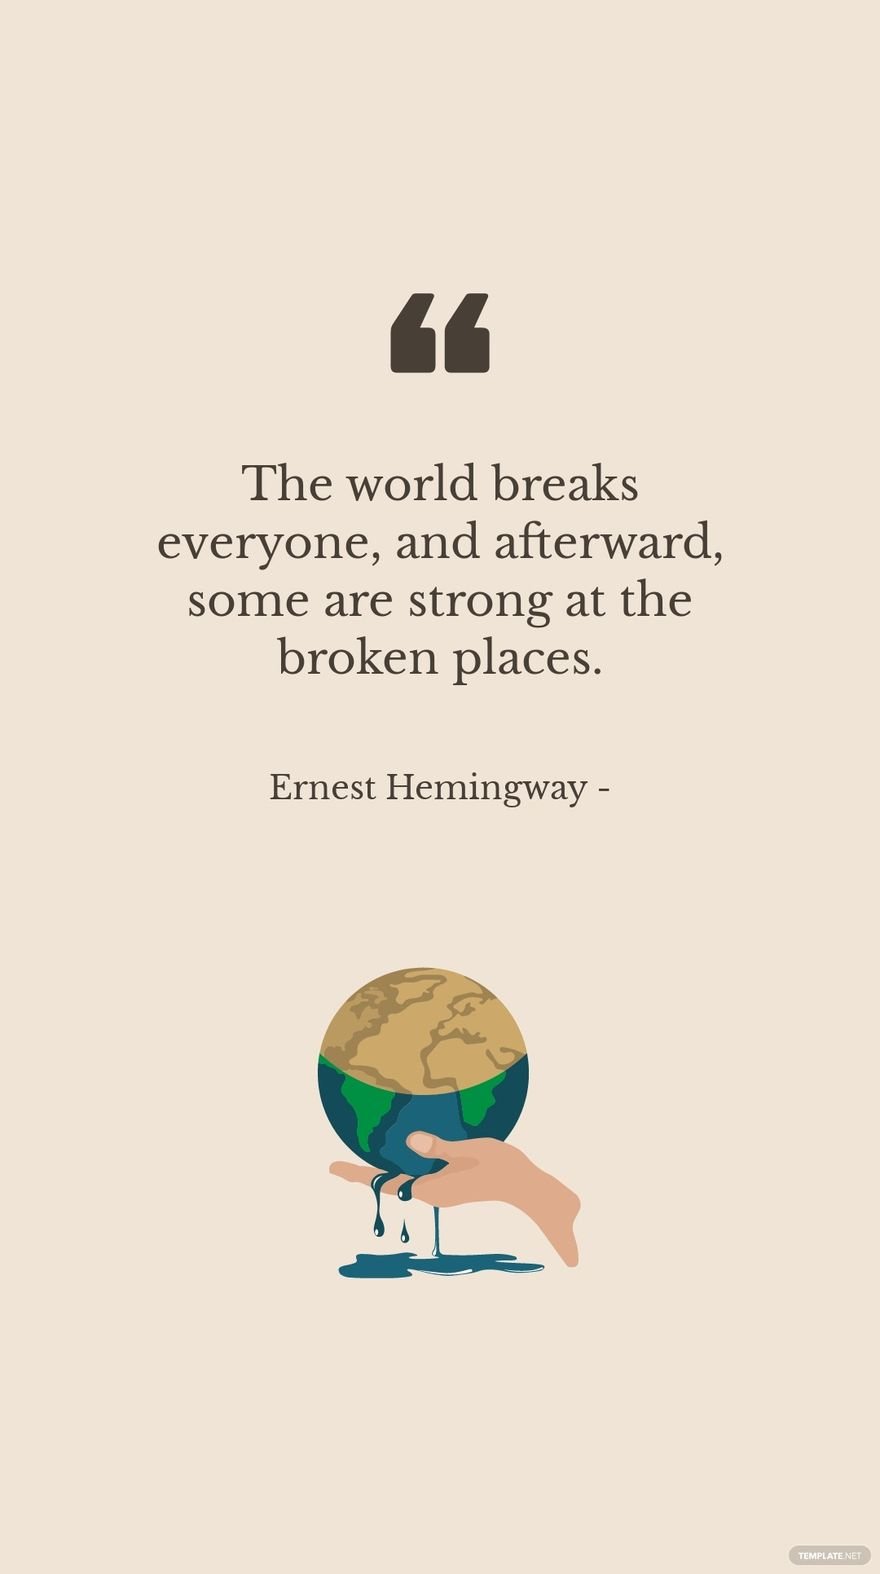 Ernest Hemingway - The world breaks everyone, and afterward, some are strong at the broken places.